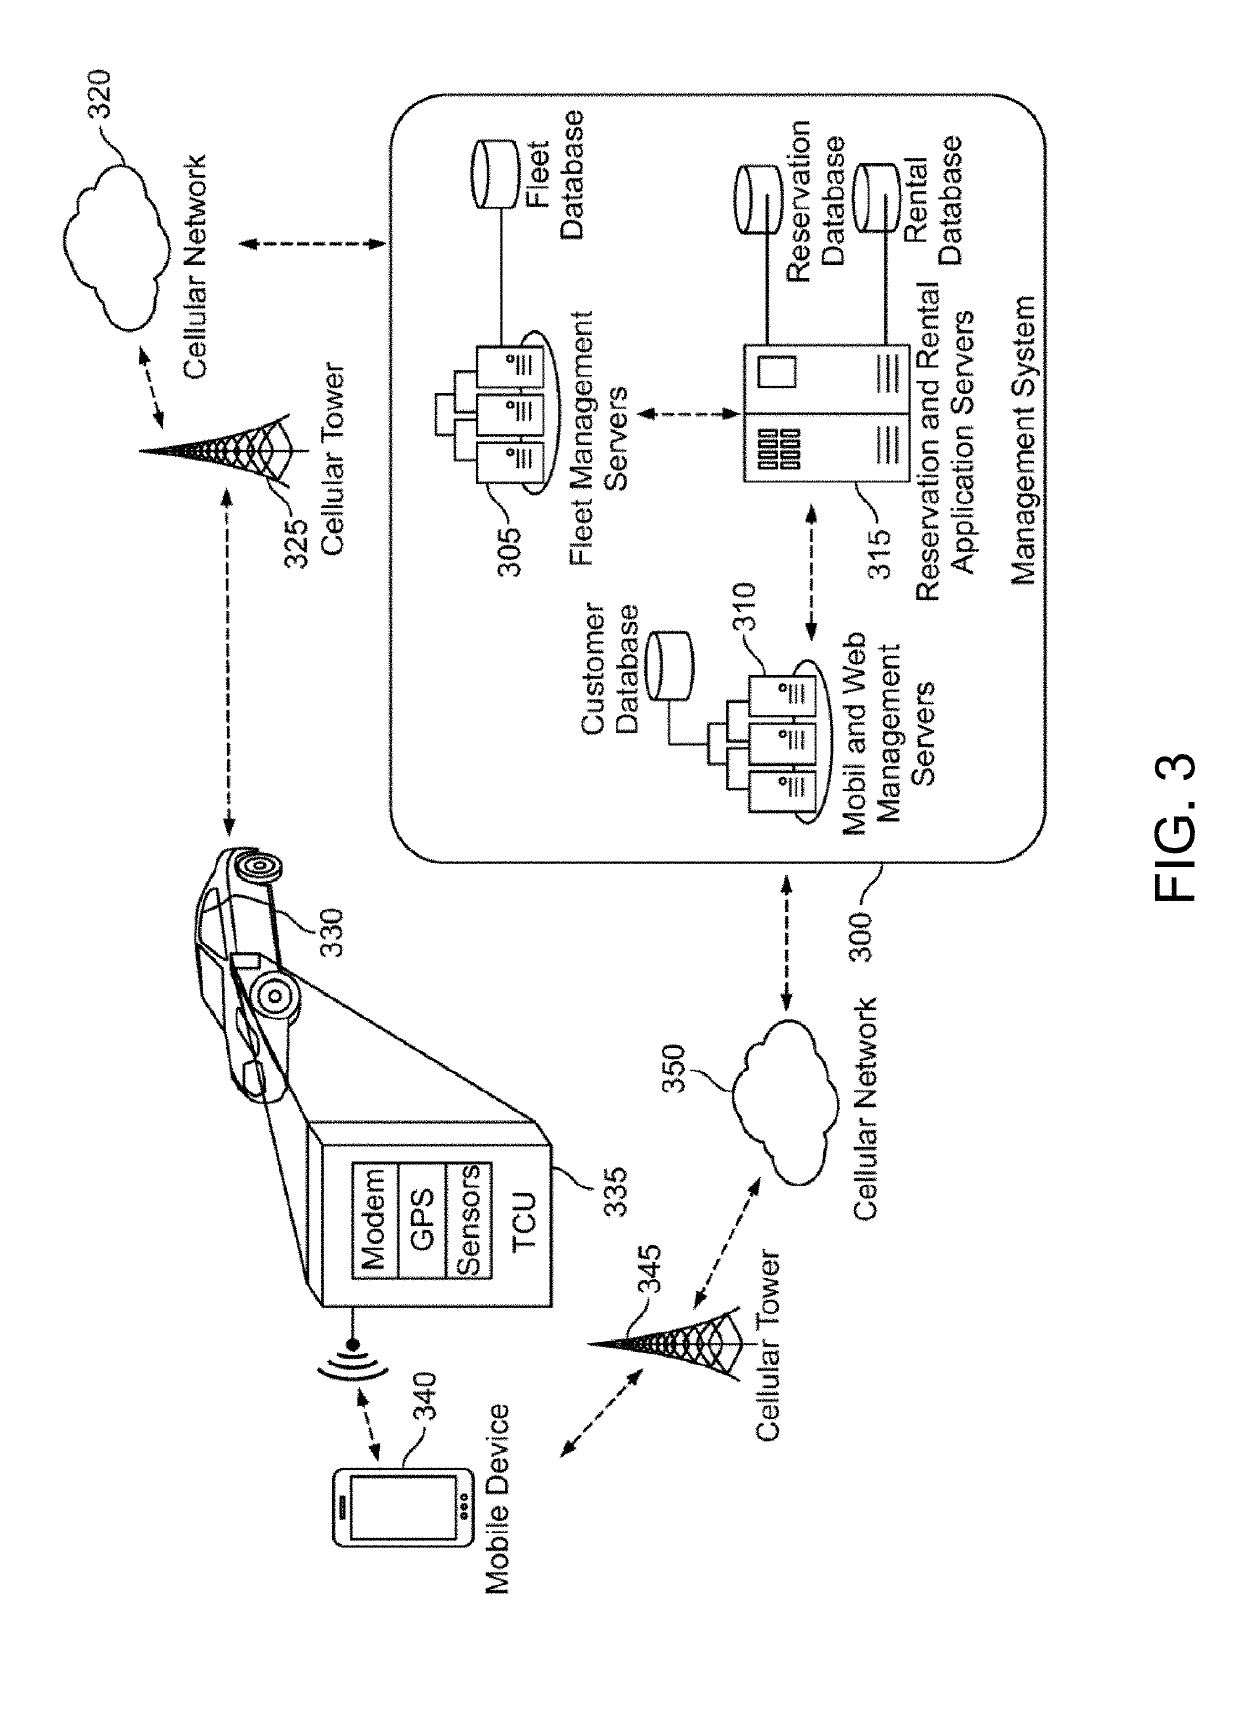 Distributed maintenance system and methods for connected fleet